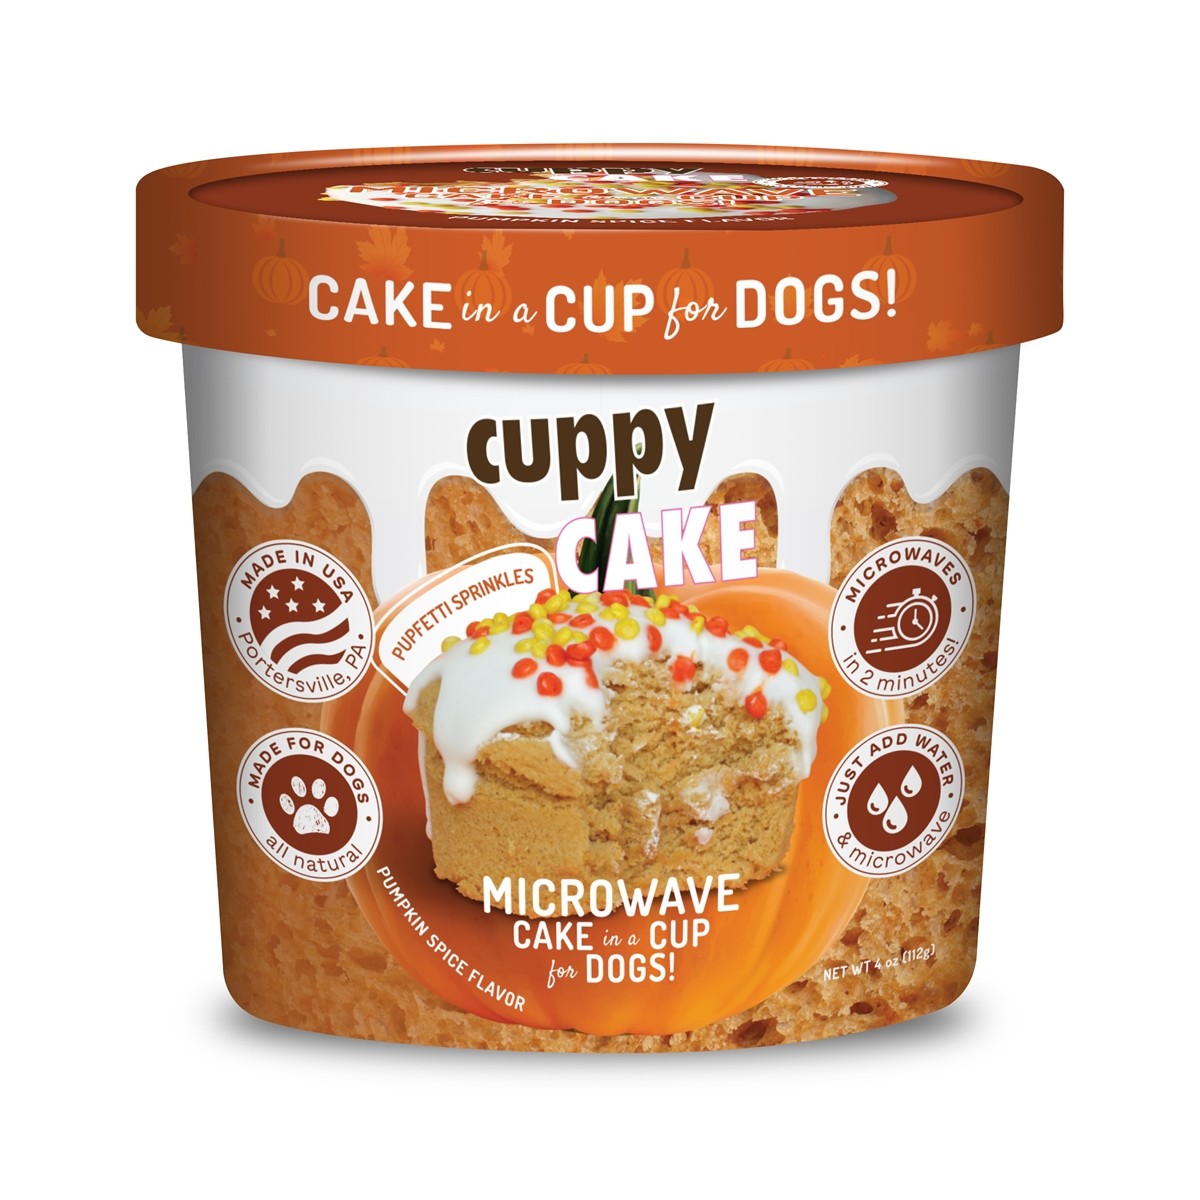 Cuppy Cake Microwave Dog Cake Mix - Pumpkin Spice with Pupfetti Sprinkles